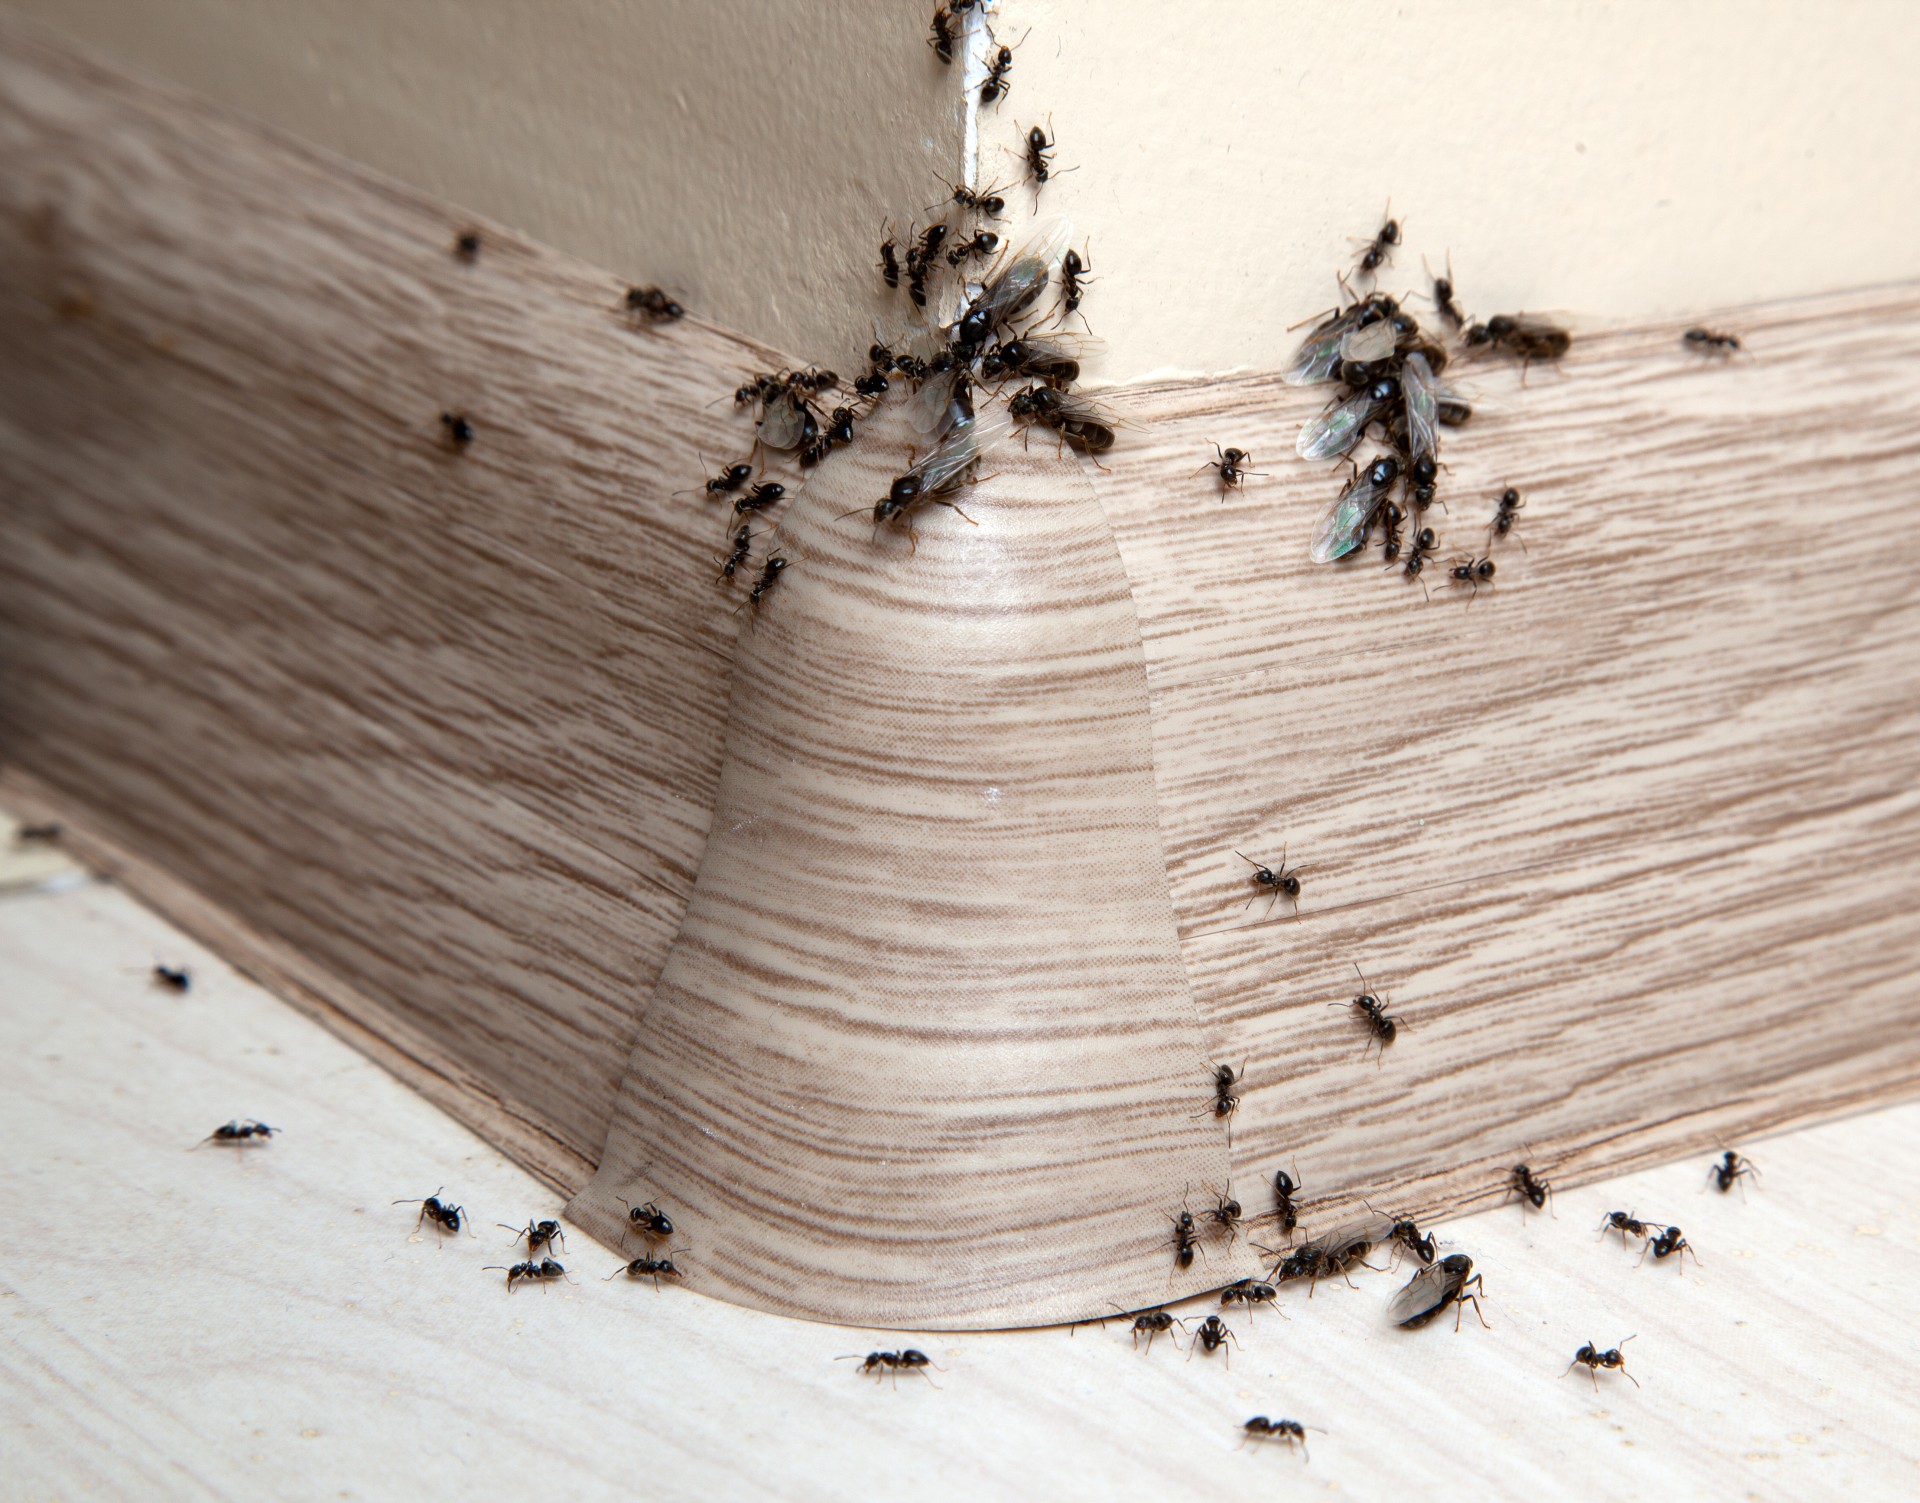 Ant Infestation, Pest Control in Great Bookham, Little Bookham, KT23. Call Now 020 8166 9746